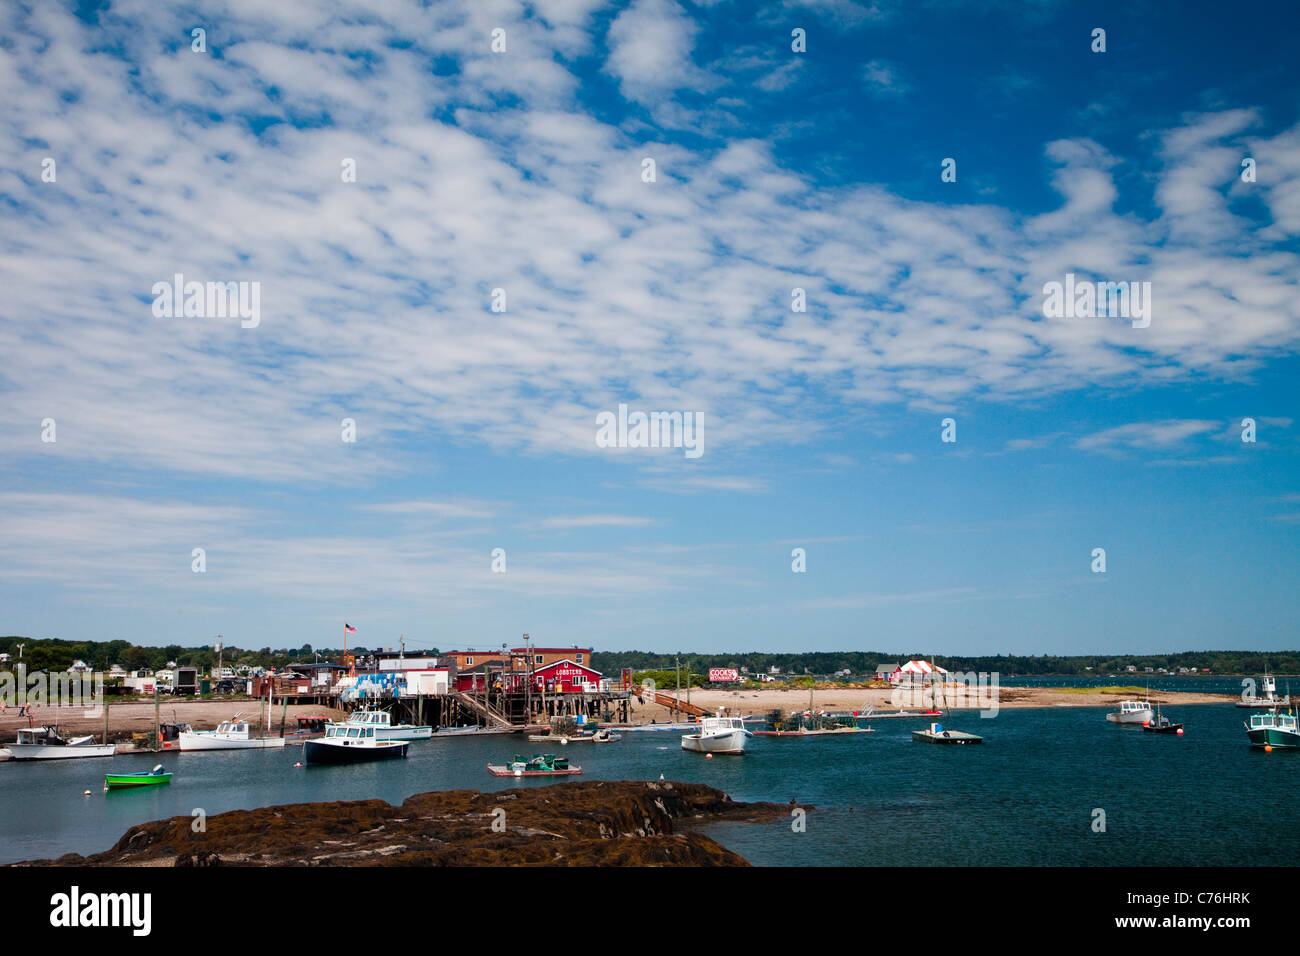 A red building on the edge of a small harbor with boats floating on a sunny day. Stock Photo